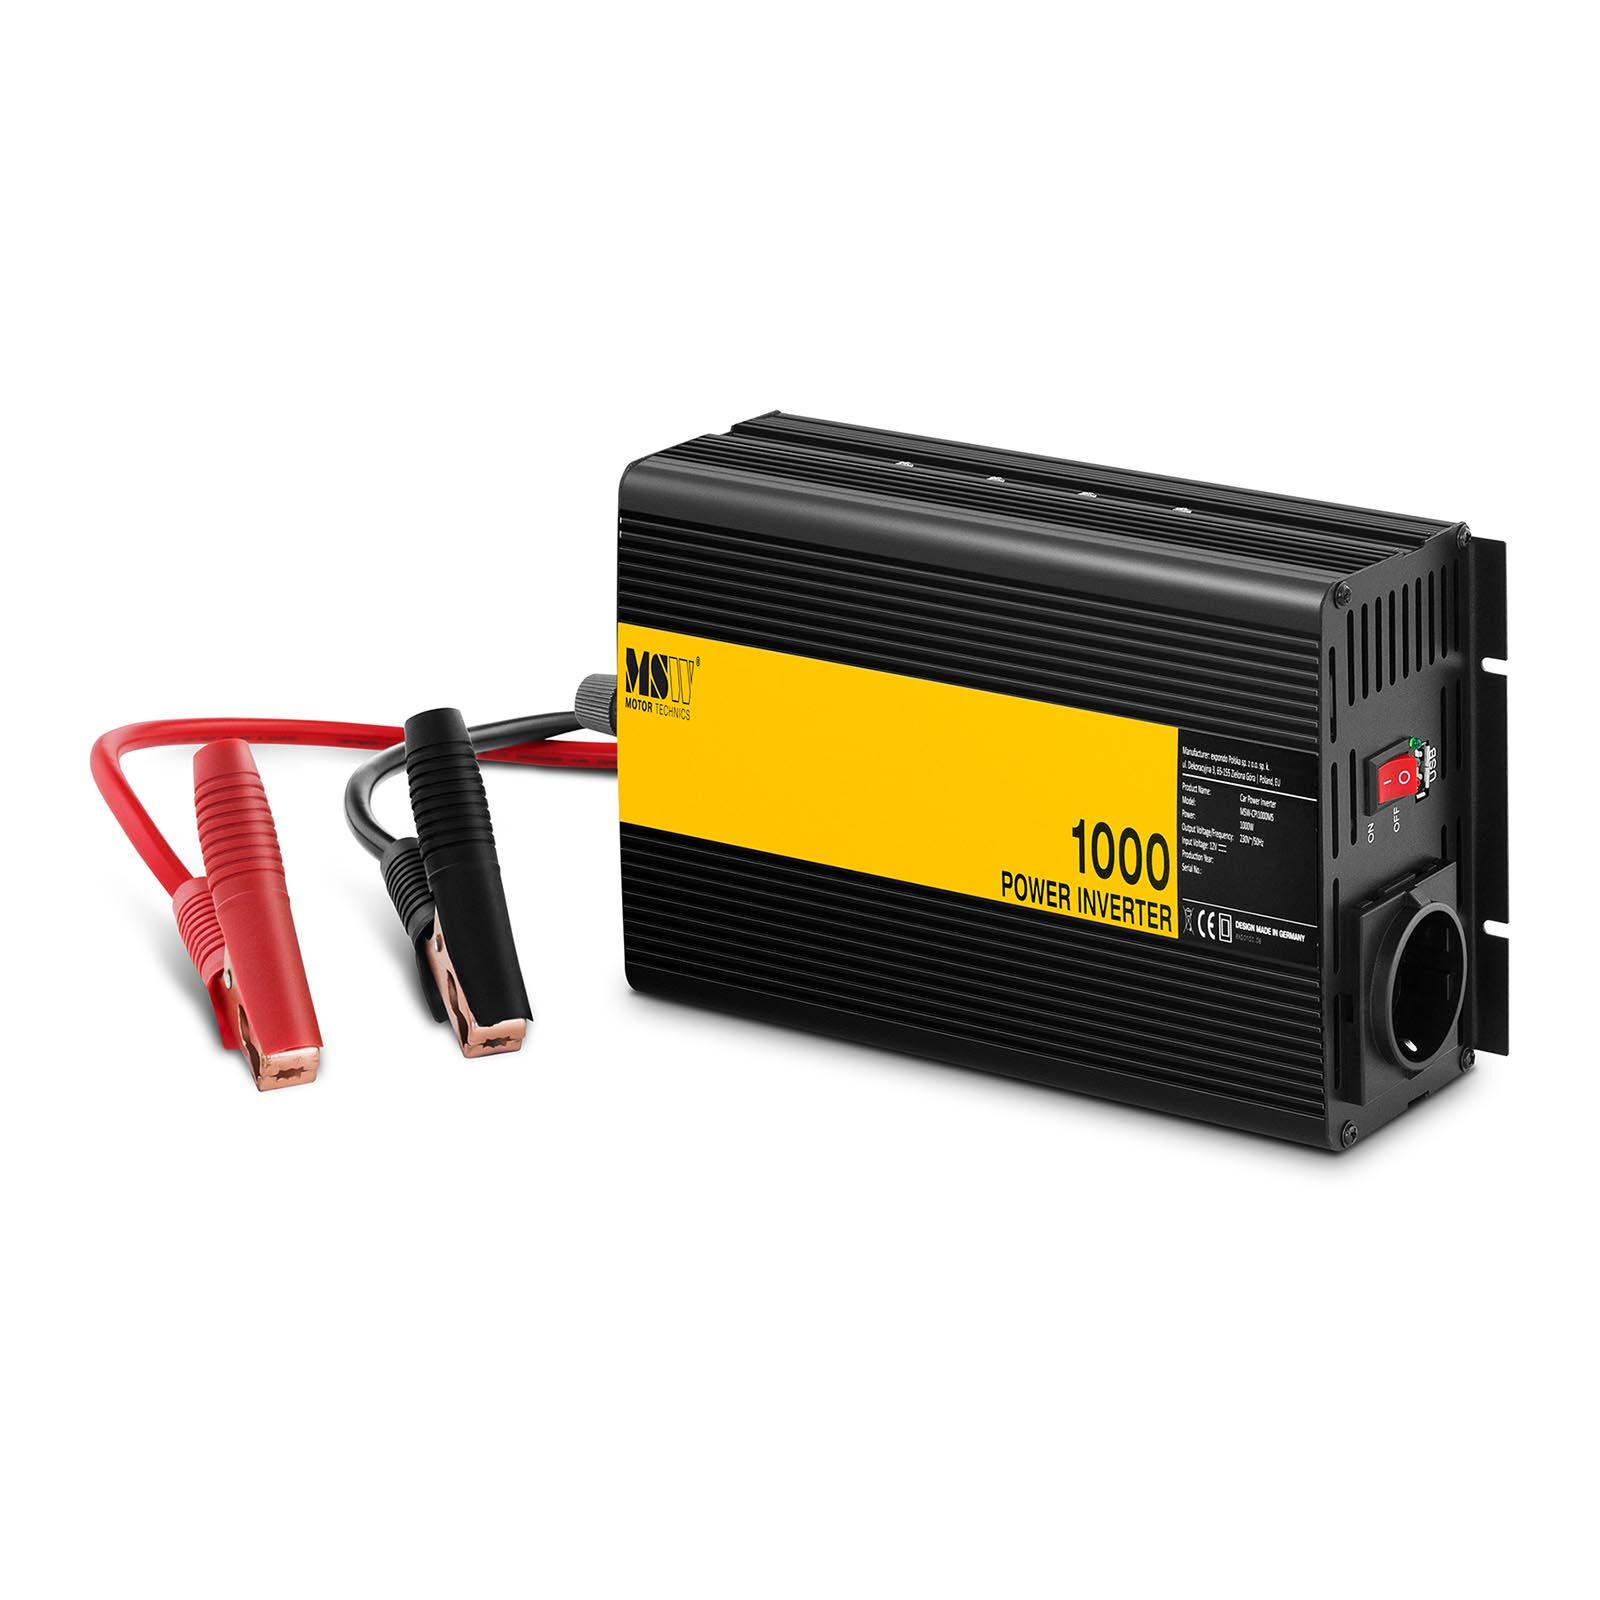 MSW Power inverter - 1000 W MSW-CPI1000MS